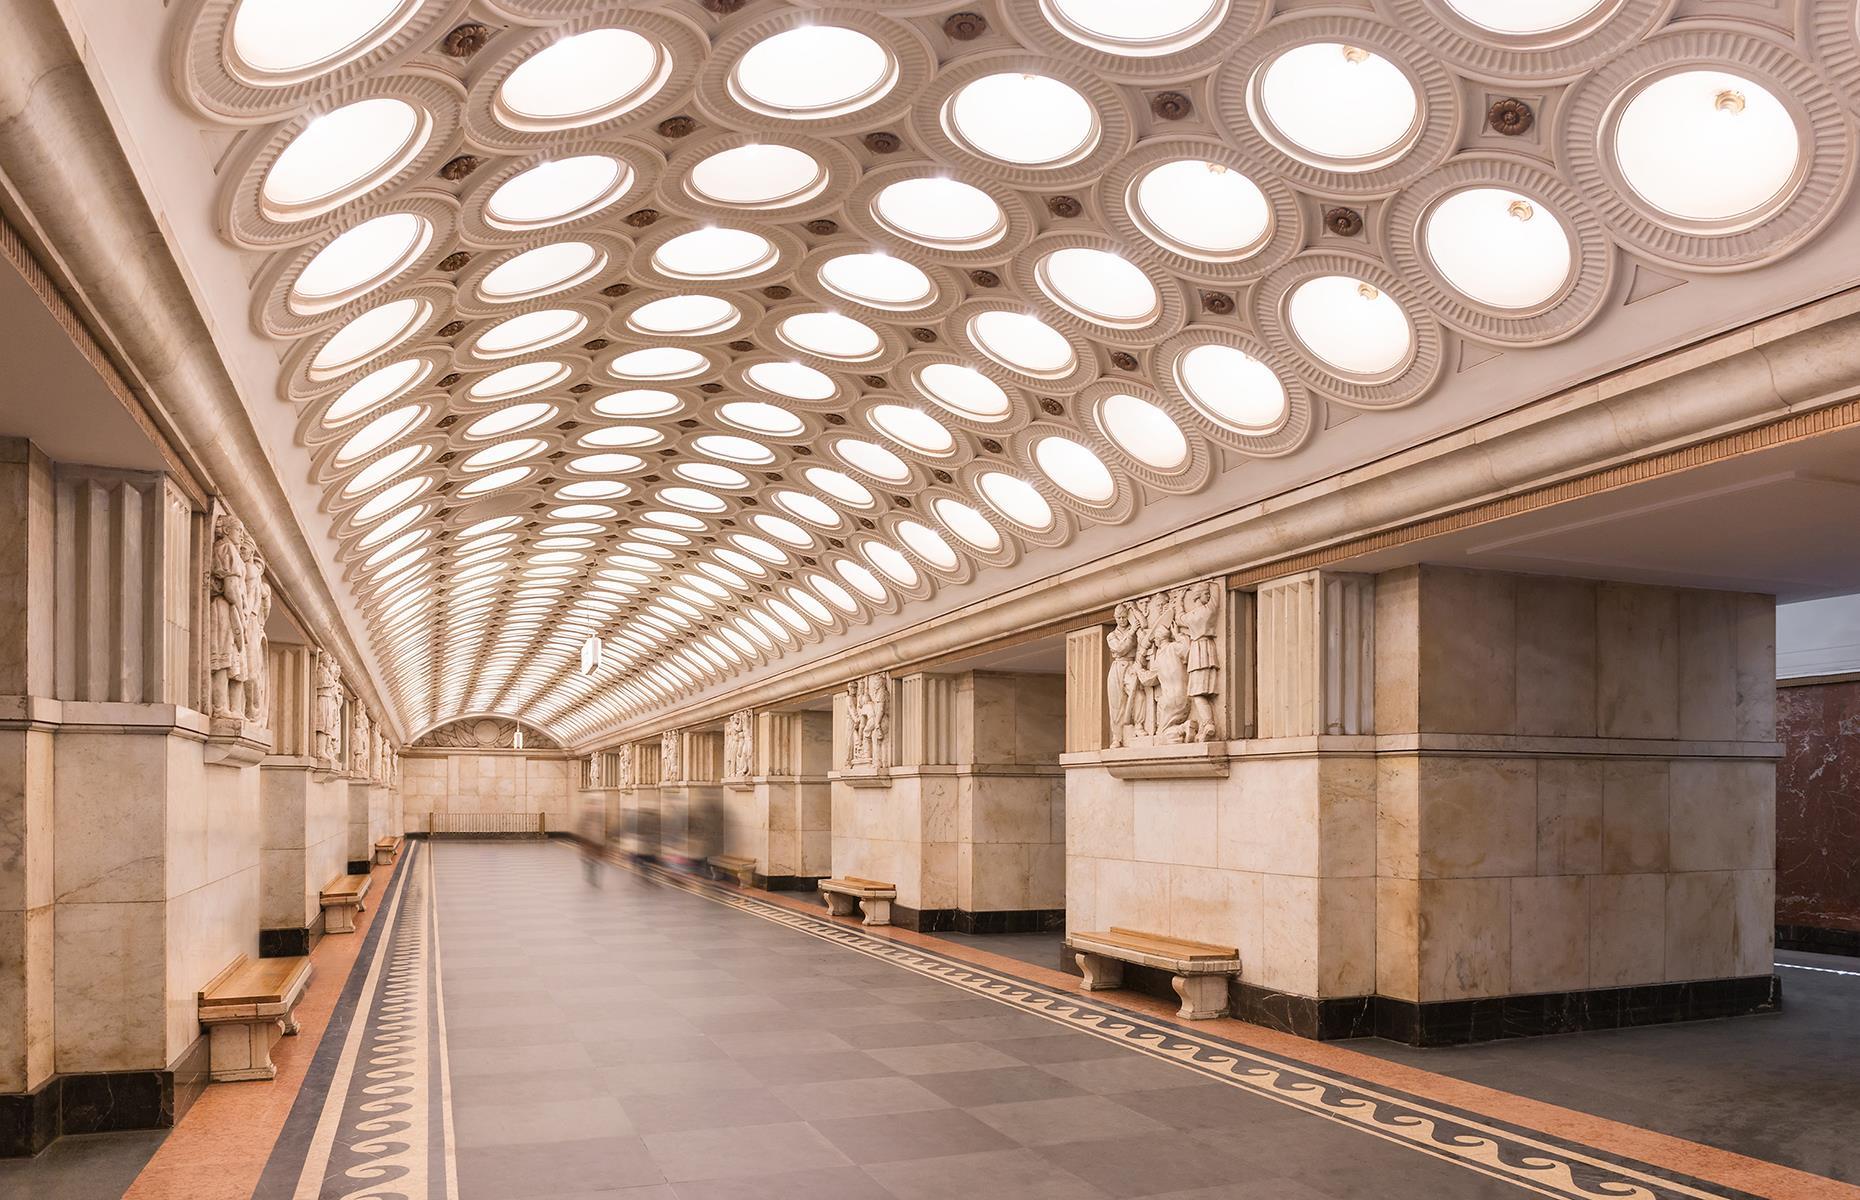 Built as part of the third expansion of Moscow metro, Elektrozavodskaya was constructed during the Second World War. Named after the electric light bulb factory nearby, the station features a slightly unnerving ceiling that looks like a mixture between the eyes of a fly and the lights above a surgeon's table.